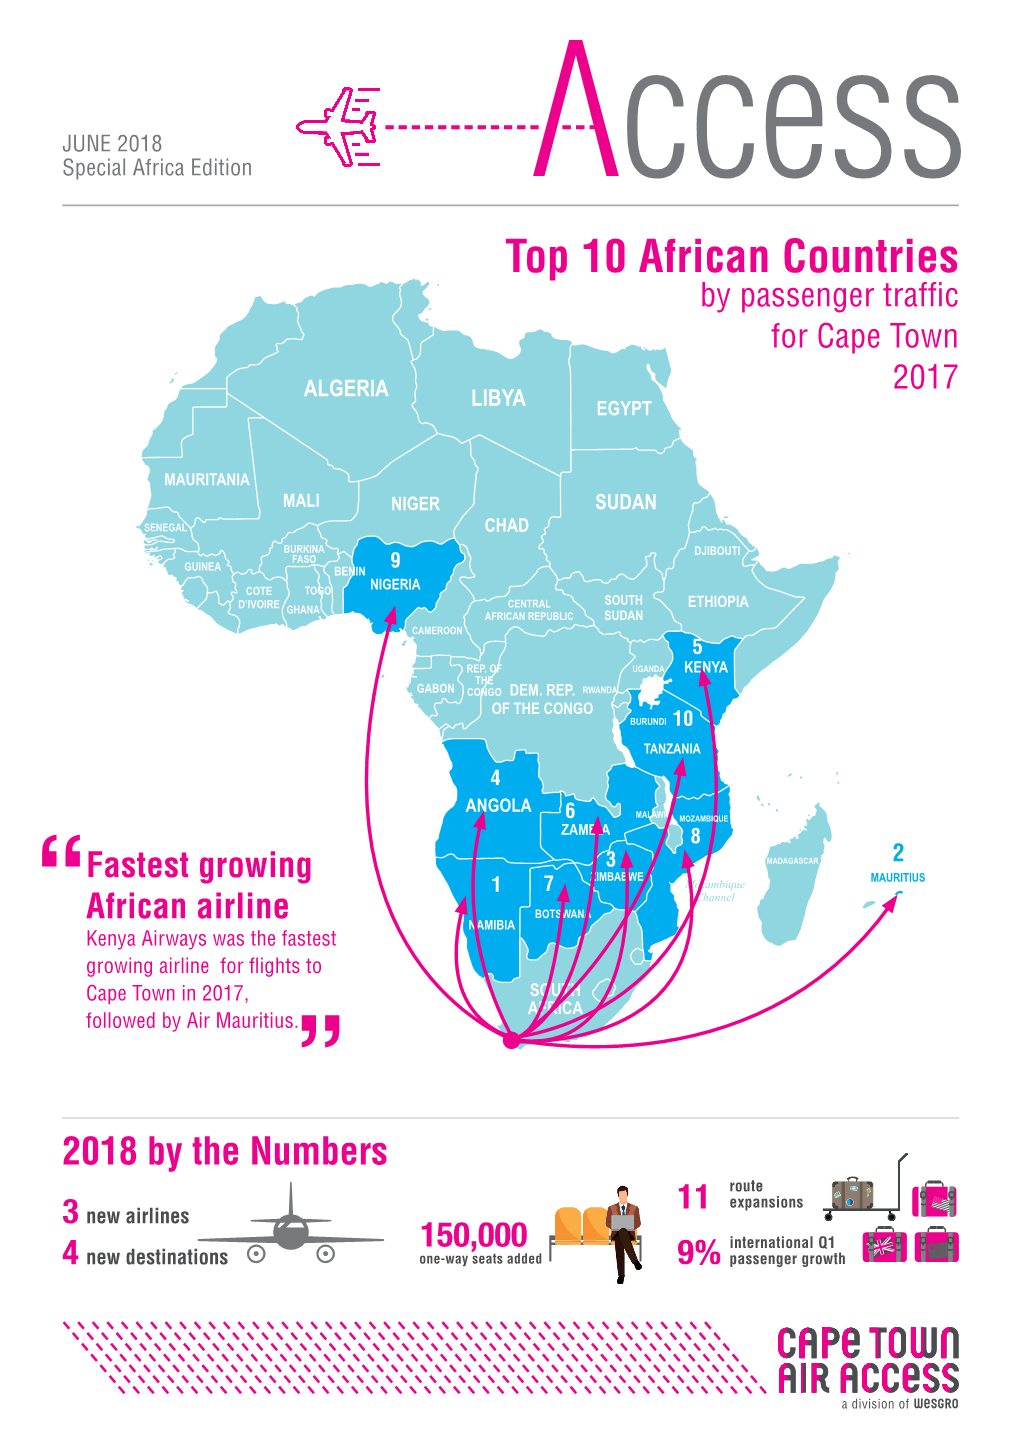 Top 10 African Countries by Passenger Traffic for Cape Town 2017